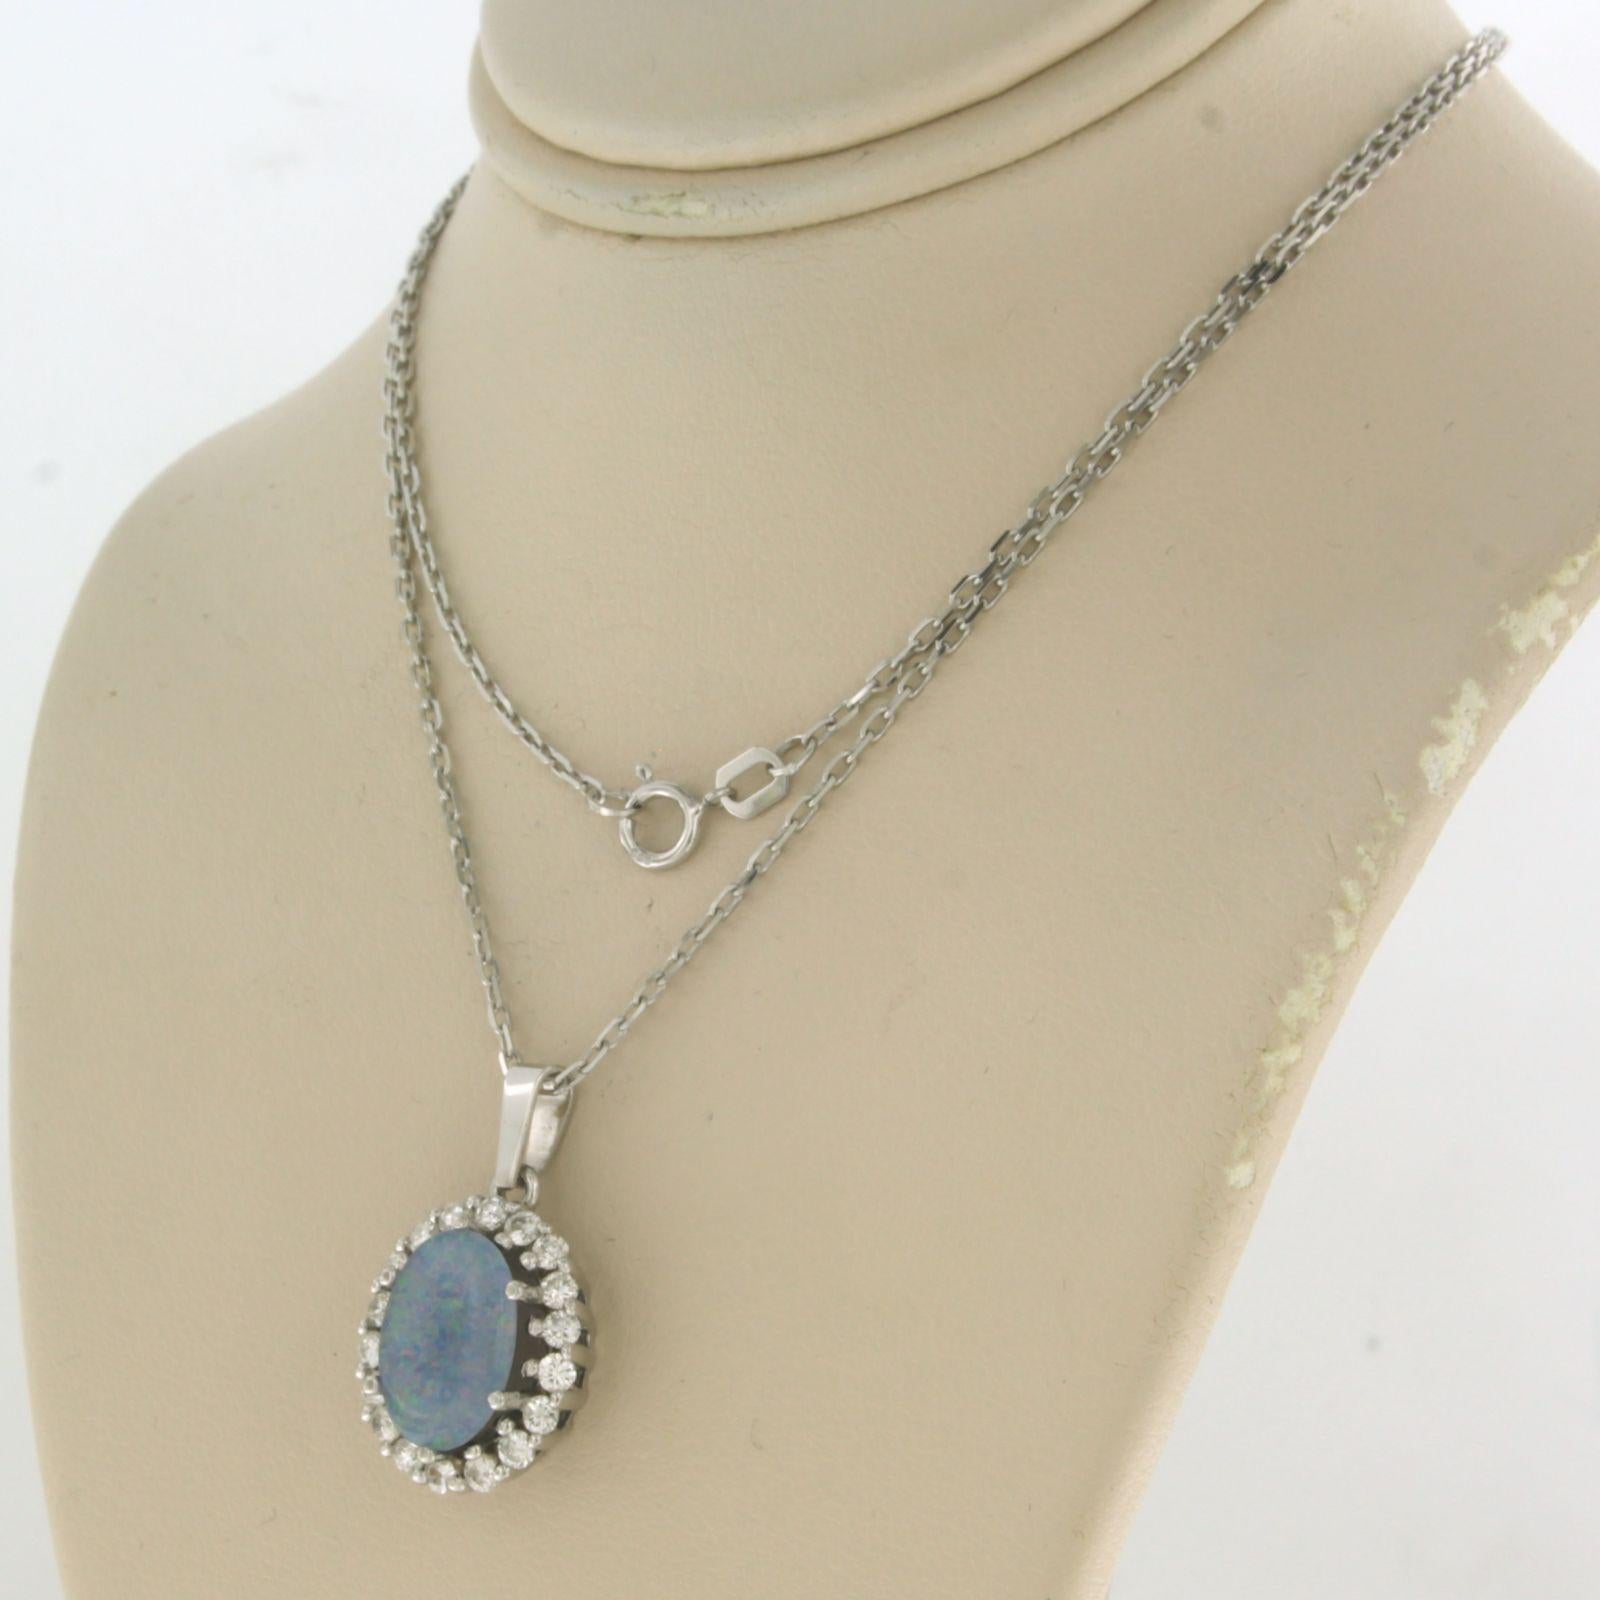 Brilliant Cut Necklace and pendant set with opal and diamond 14k white gold